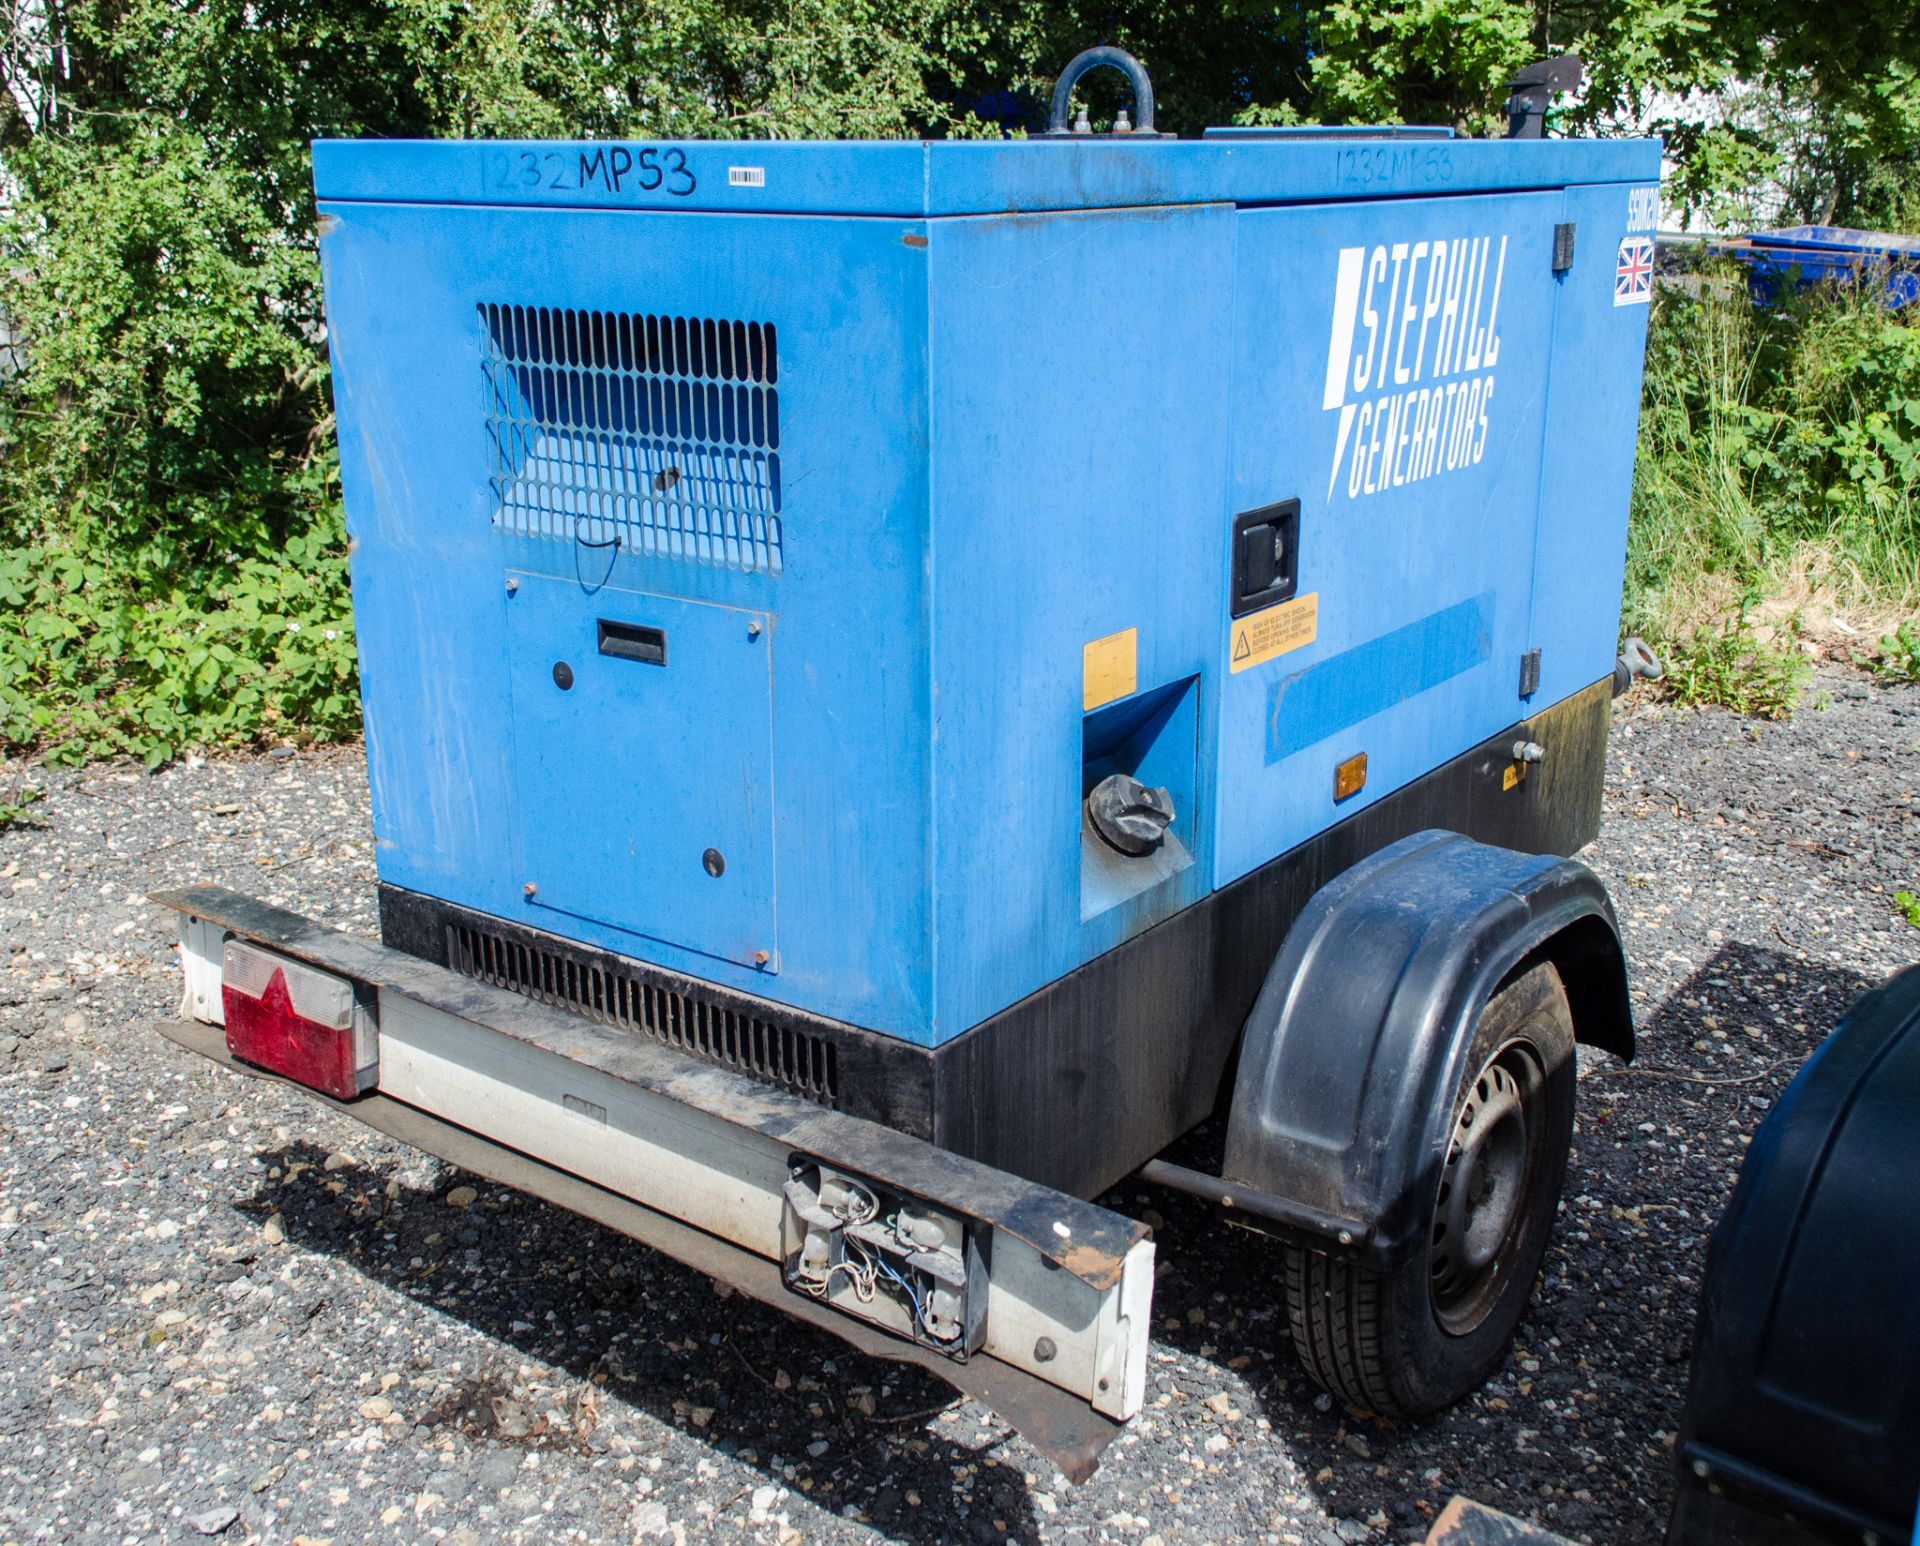 Stephill SSDK20 20 kva diesel driven fast tow generator Year: 2013 S/N: 600075 Recorded Hours: 12971 - Image 2 of 8